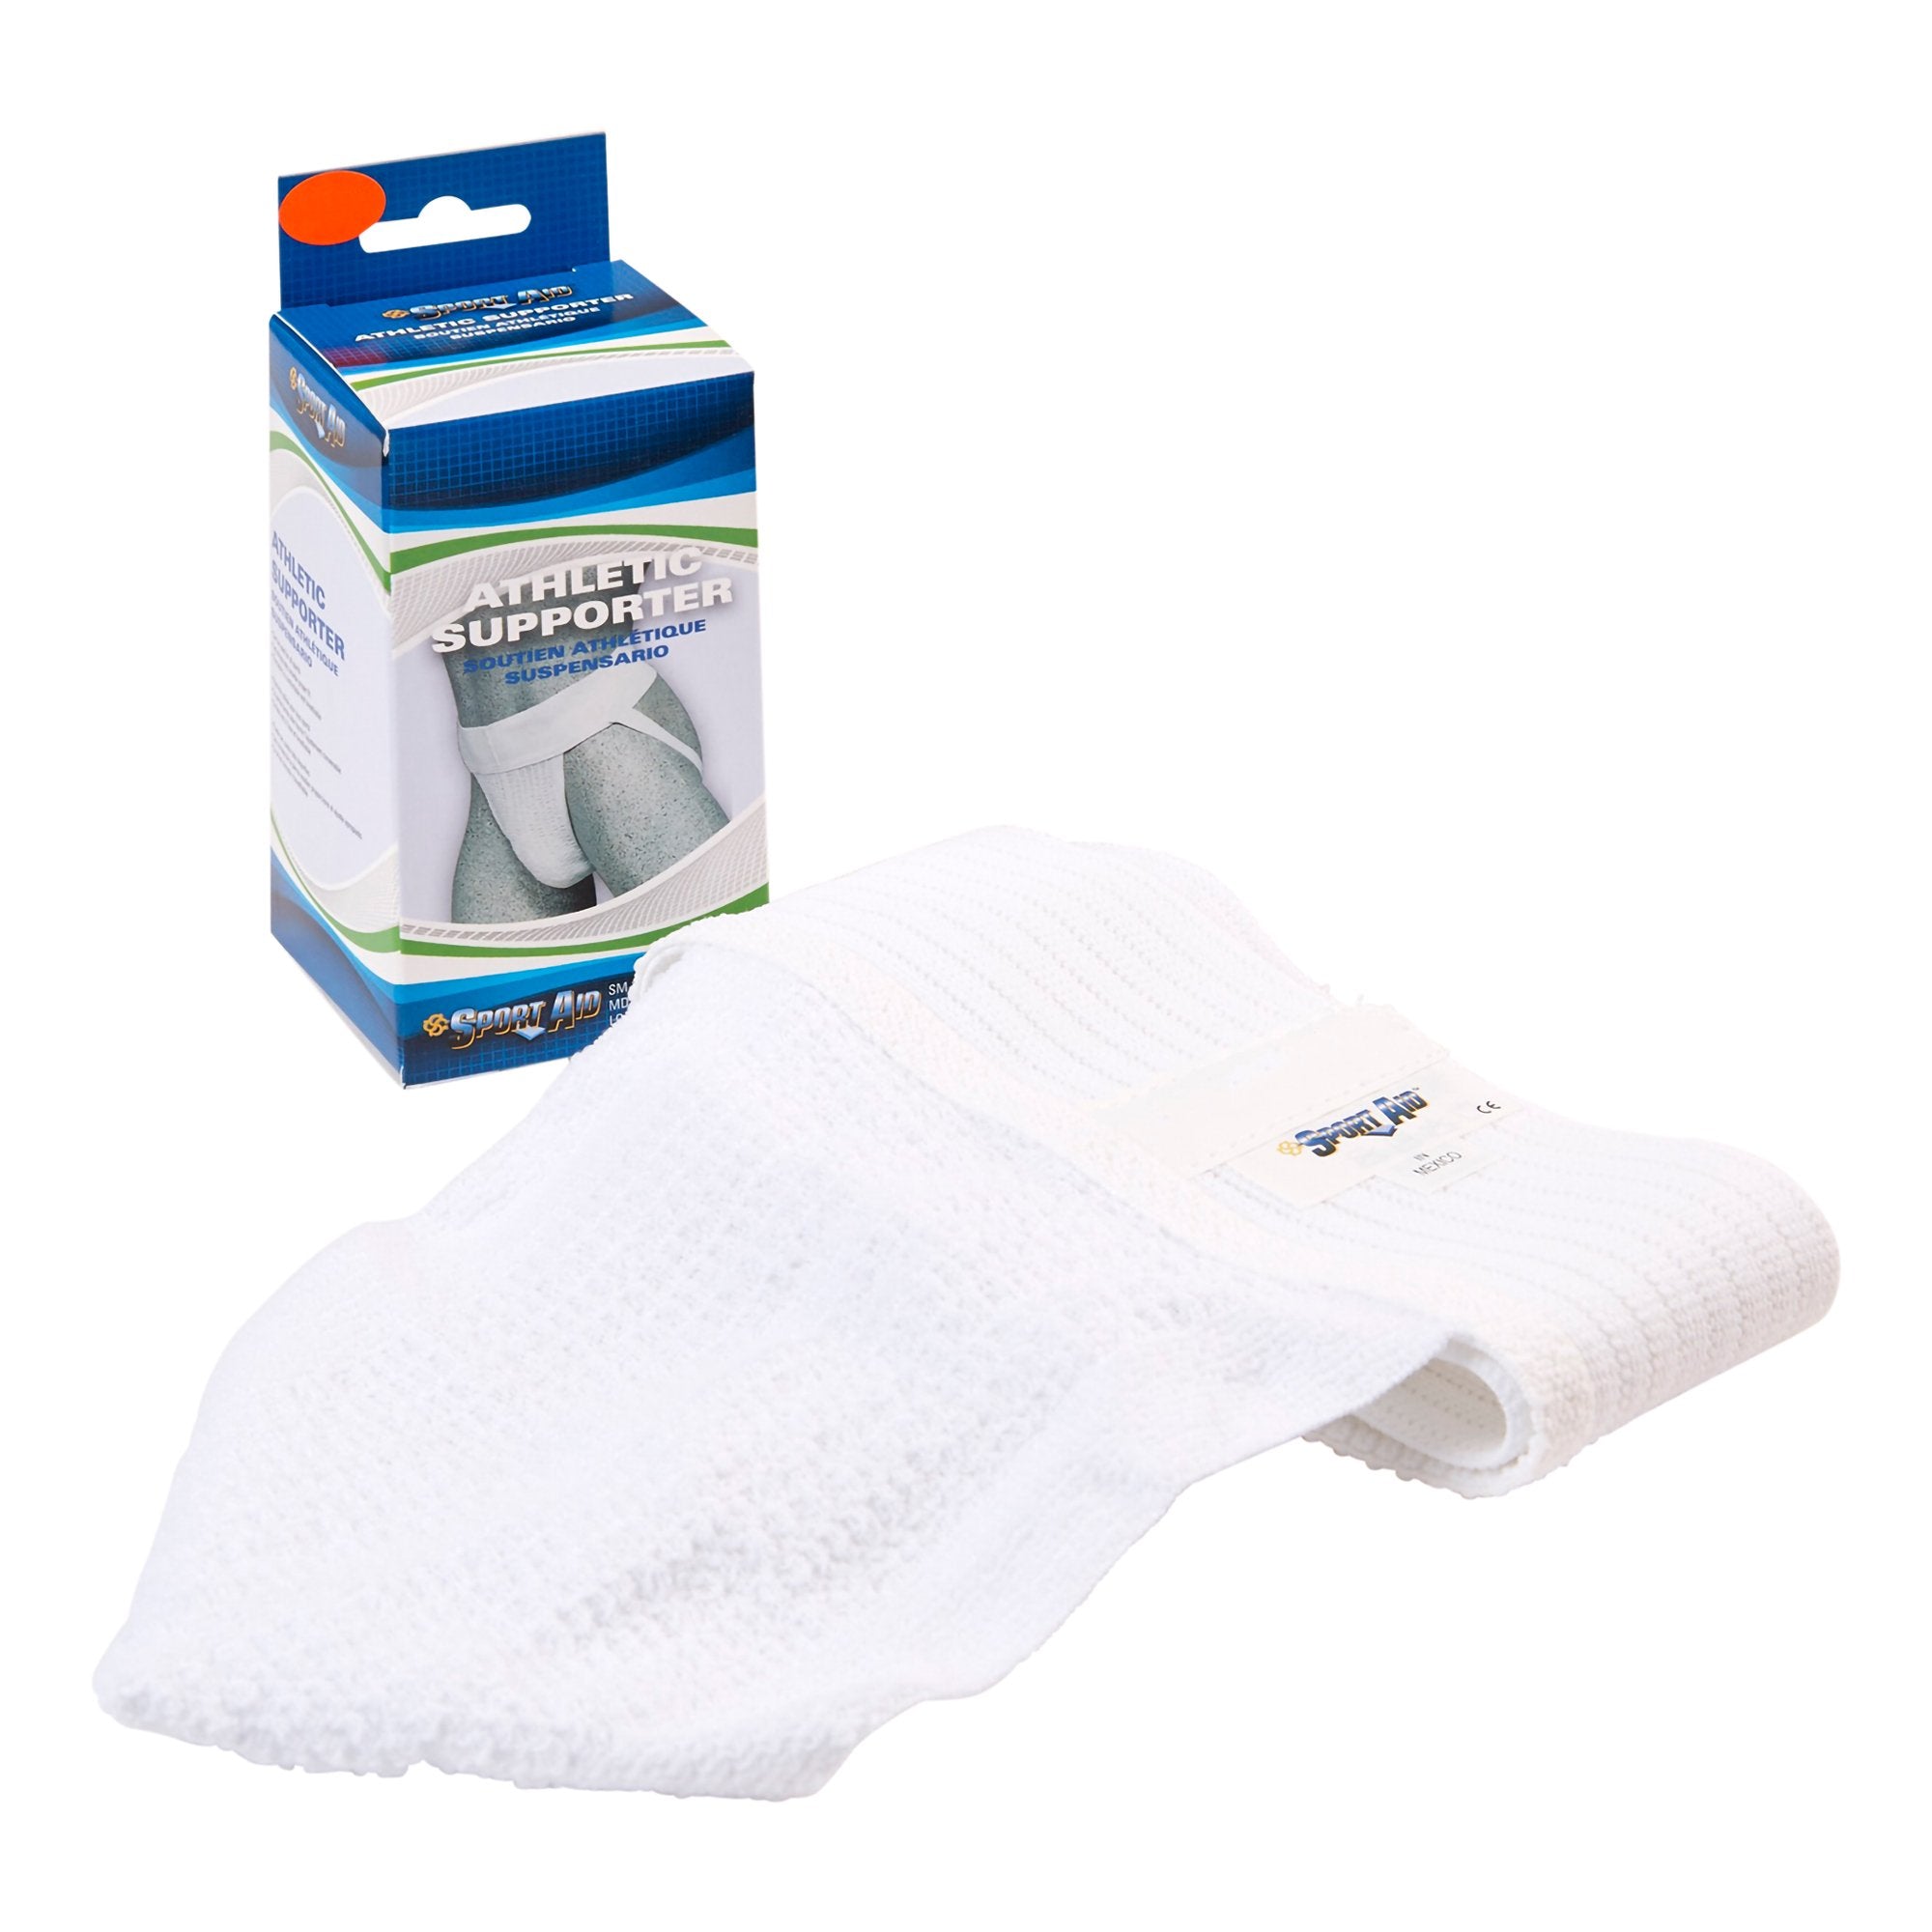 Sport Aid™ Athletic Supporter, Large (1 Unit)